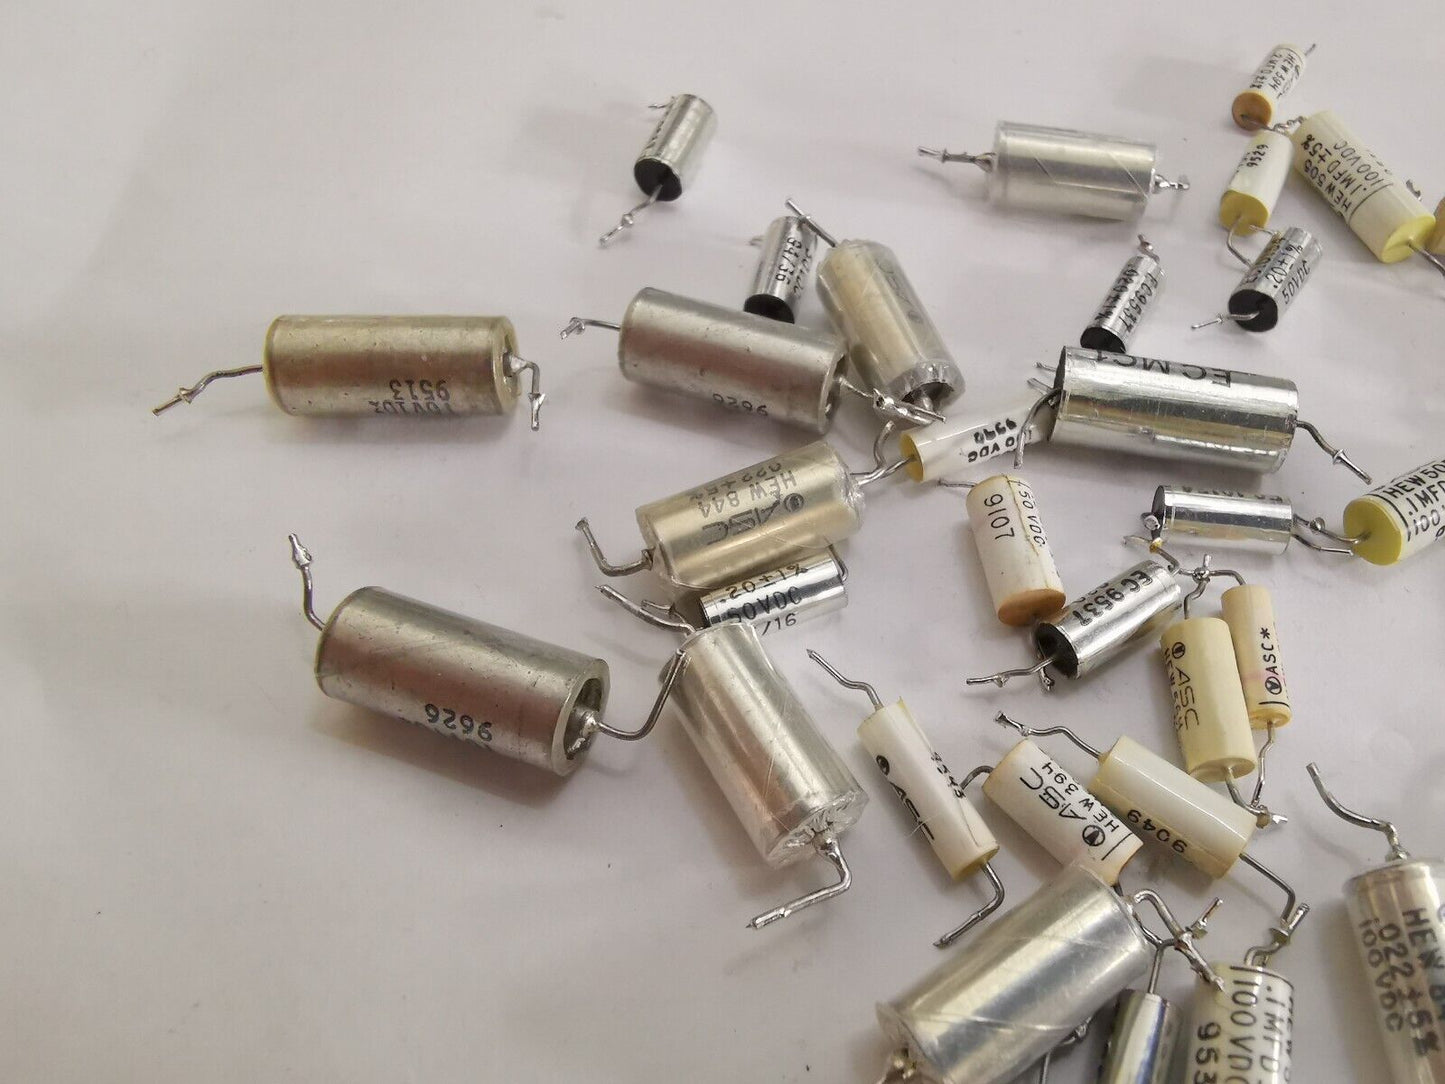 High Quality Film / Tantalum Capacitor Used For Sample And Hold Amp